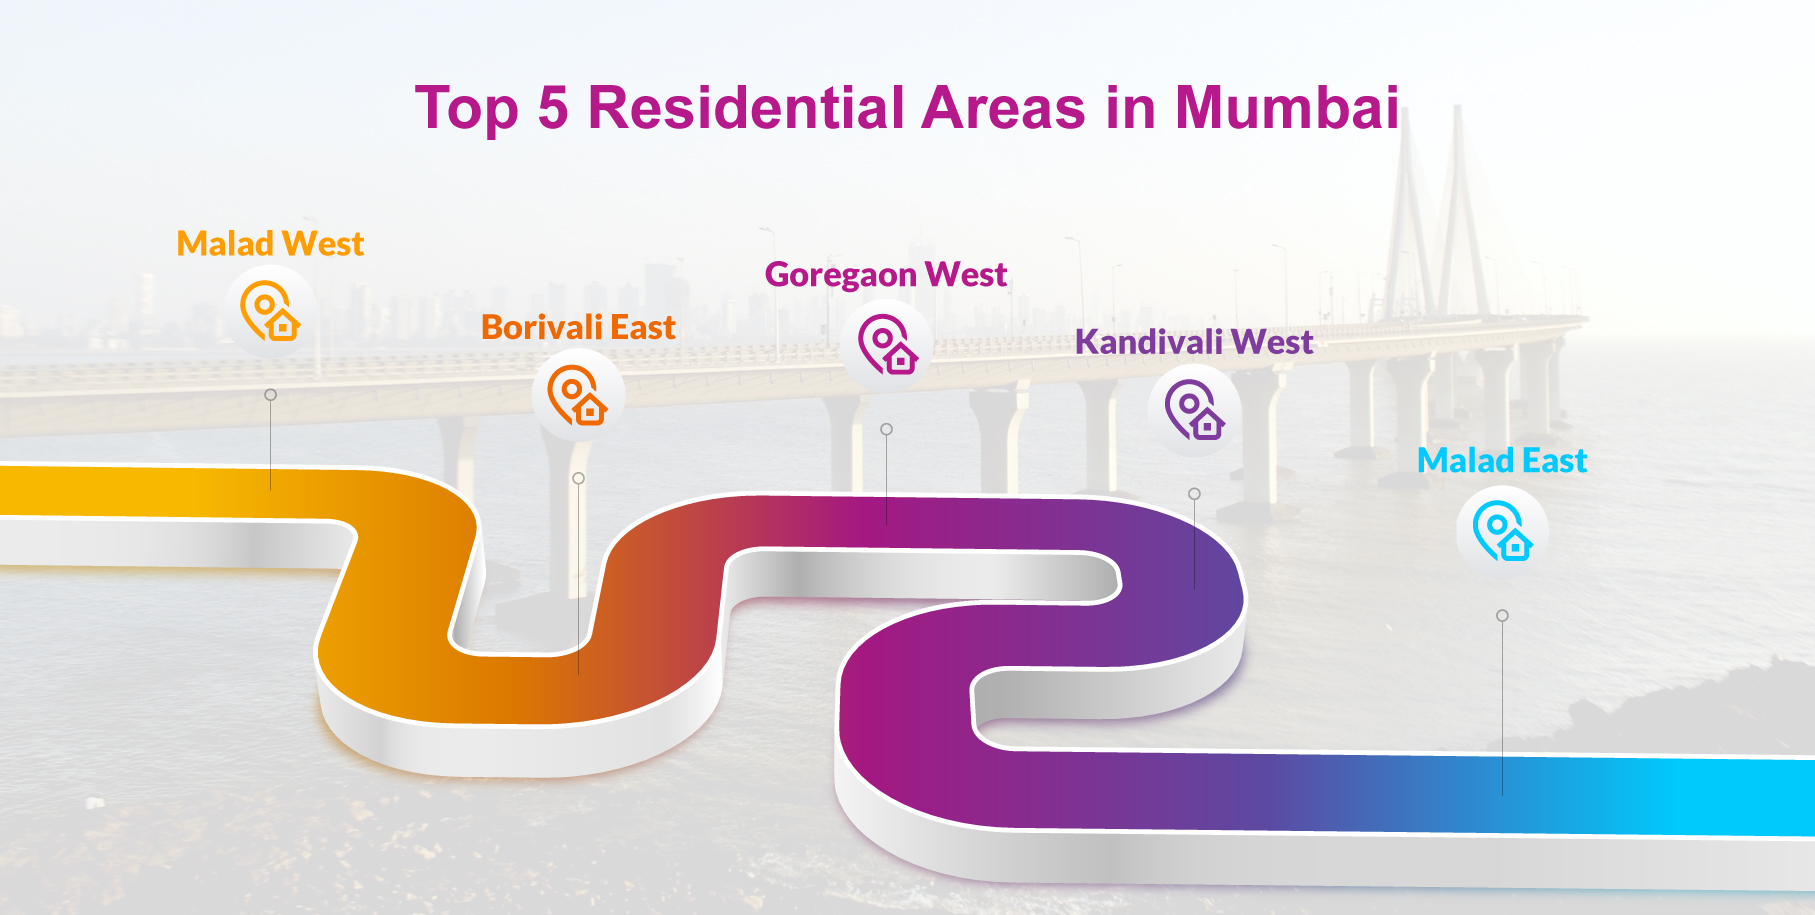 Top 5 Residential Areas to Buy a House in Mumbai